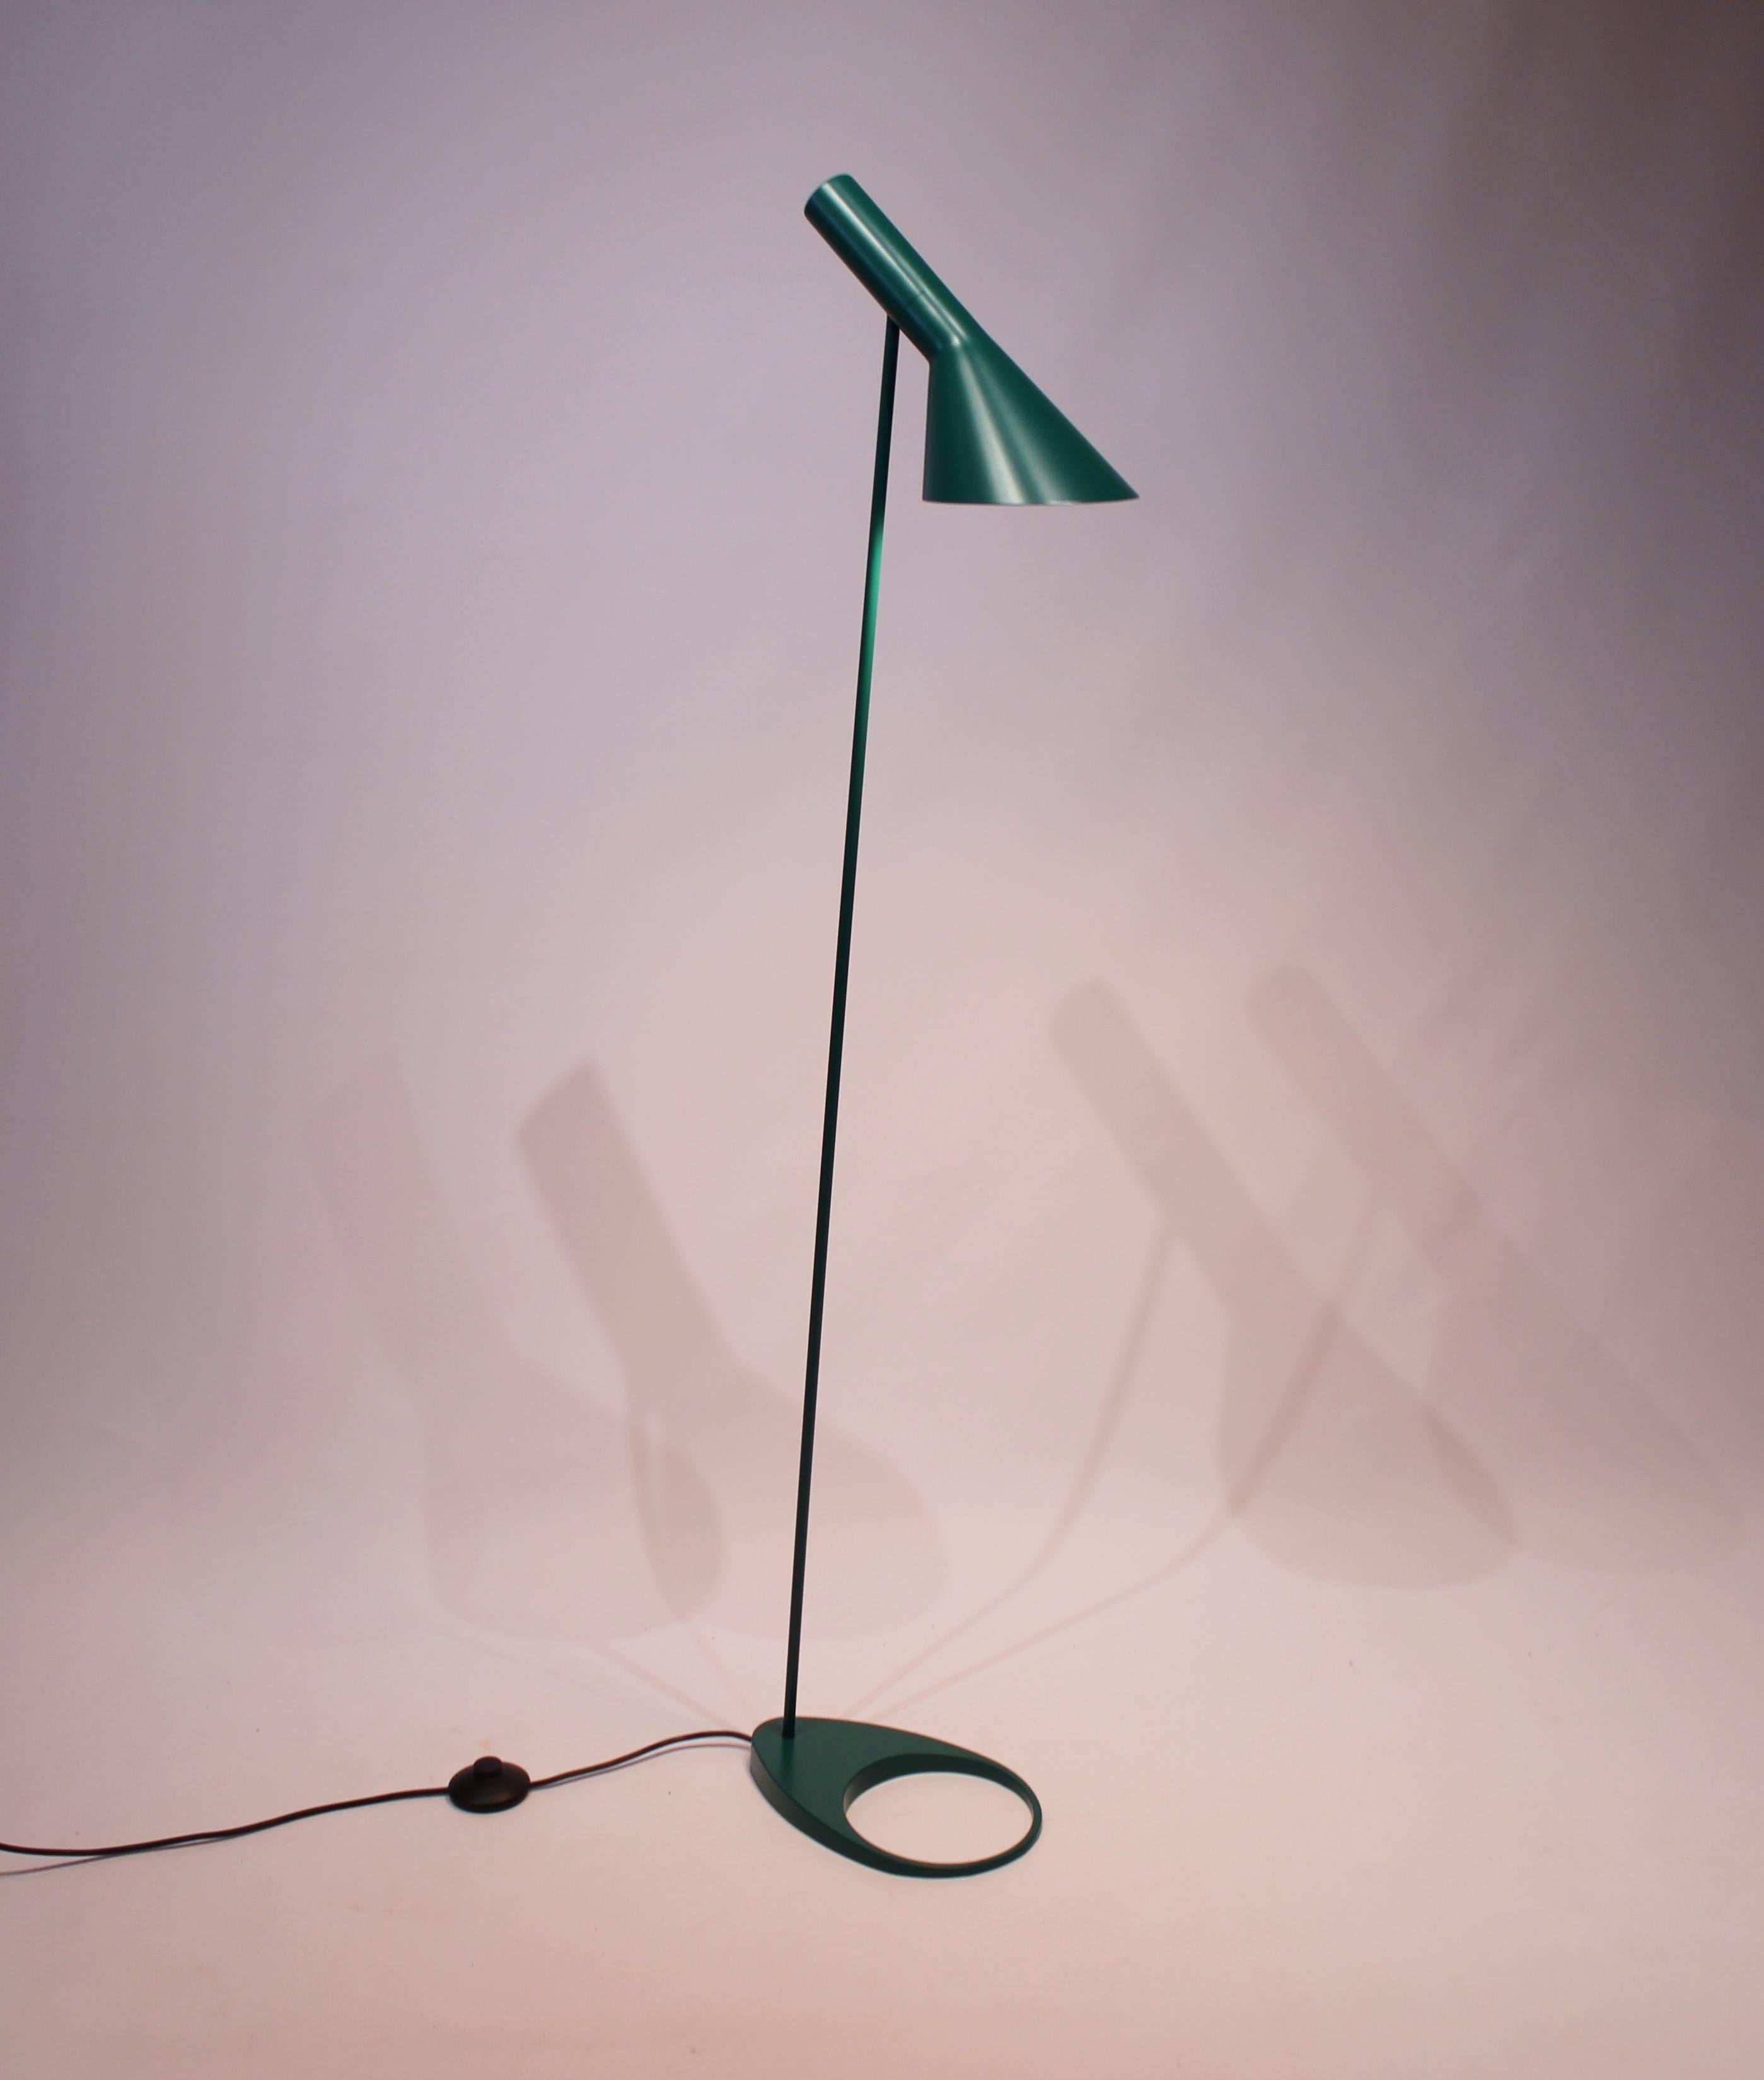 Green floor lamp designed by Arne Jacobsen in 1960 and manufactured by Louis Poulsen. The lamp is in great vintage condition and of Classic timeless Danish design.